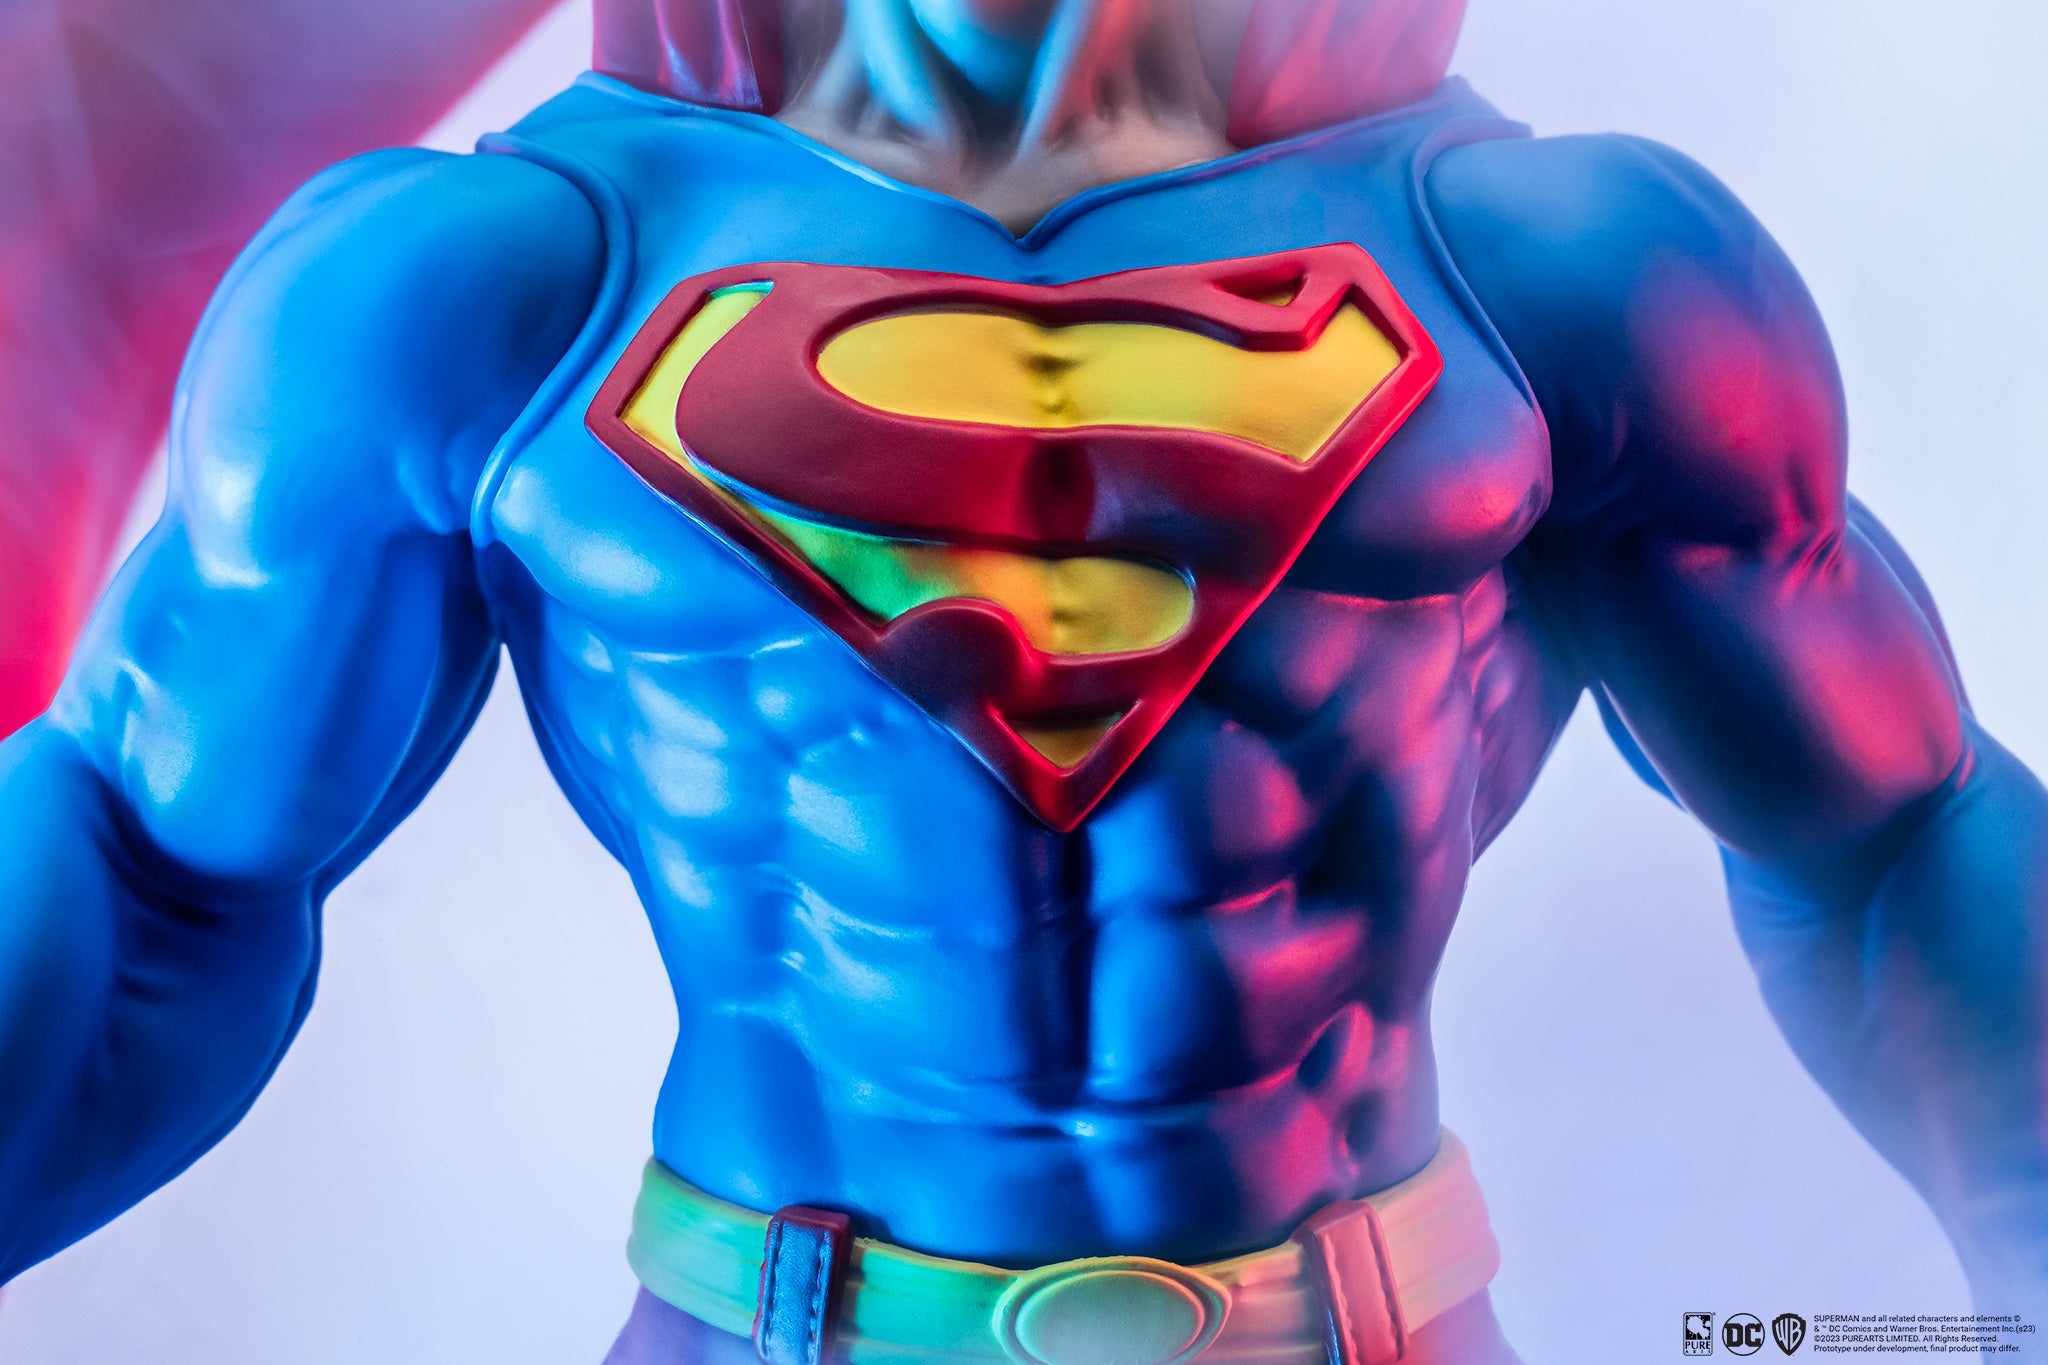 DC Heroes Superman Classic Version 1:8 Scale Statue Previews Exclusive